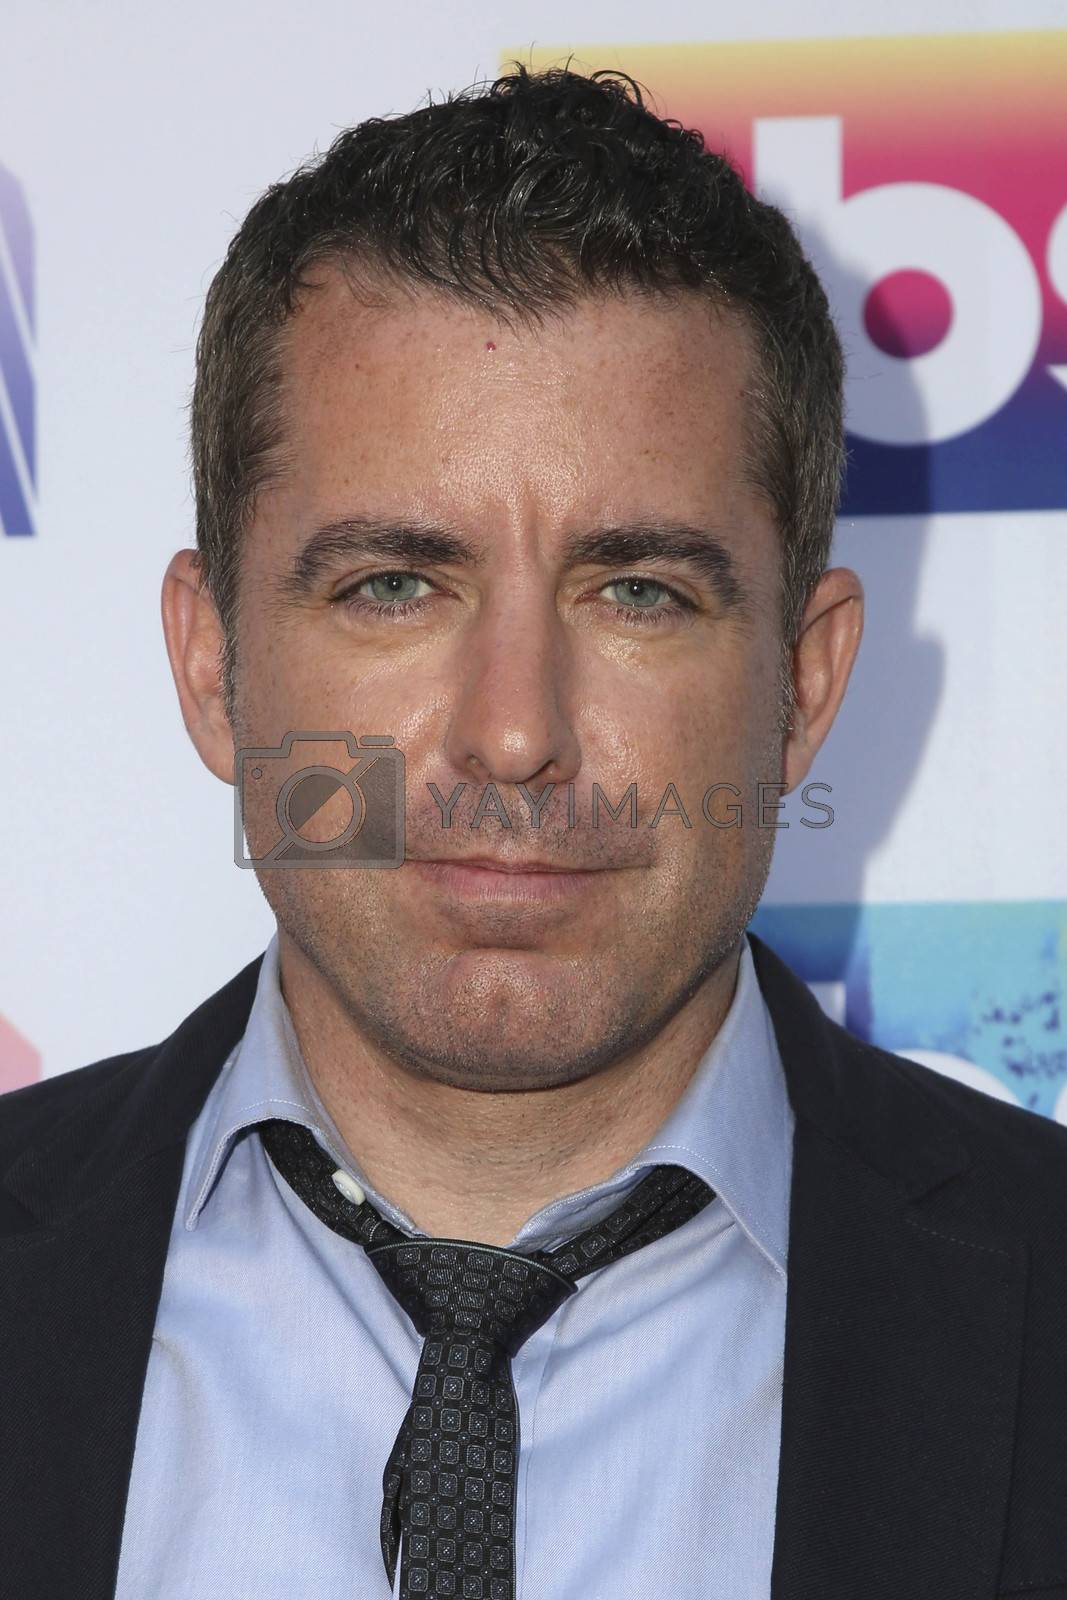 Royalty free image of Jason Jones
at TBS's A Night Out With - For Your Consideration Event, Ace Hotel, Los Angeles, CA 05-24-16/ImageCollect by ImageCollect